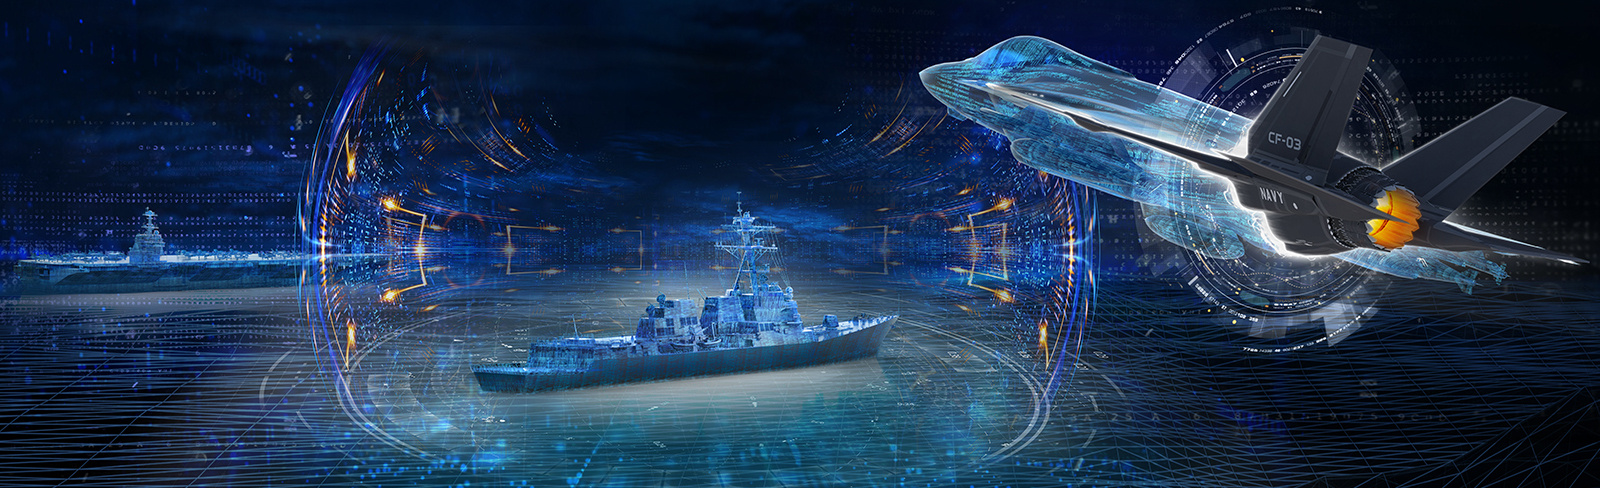 Communications, Navigation, and Identification (CNI) systems by BAE Systems give warfighters secure, time-critical Intel that transforms survivability, boosts lethality, and supports the mission.